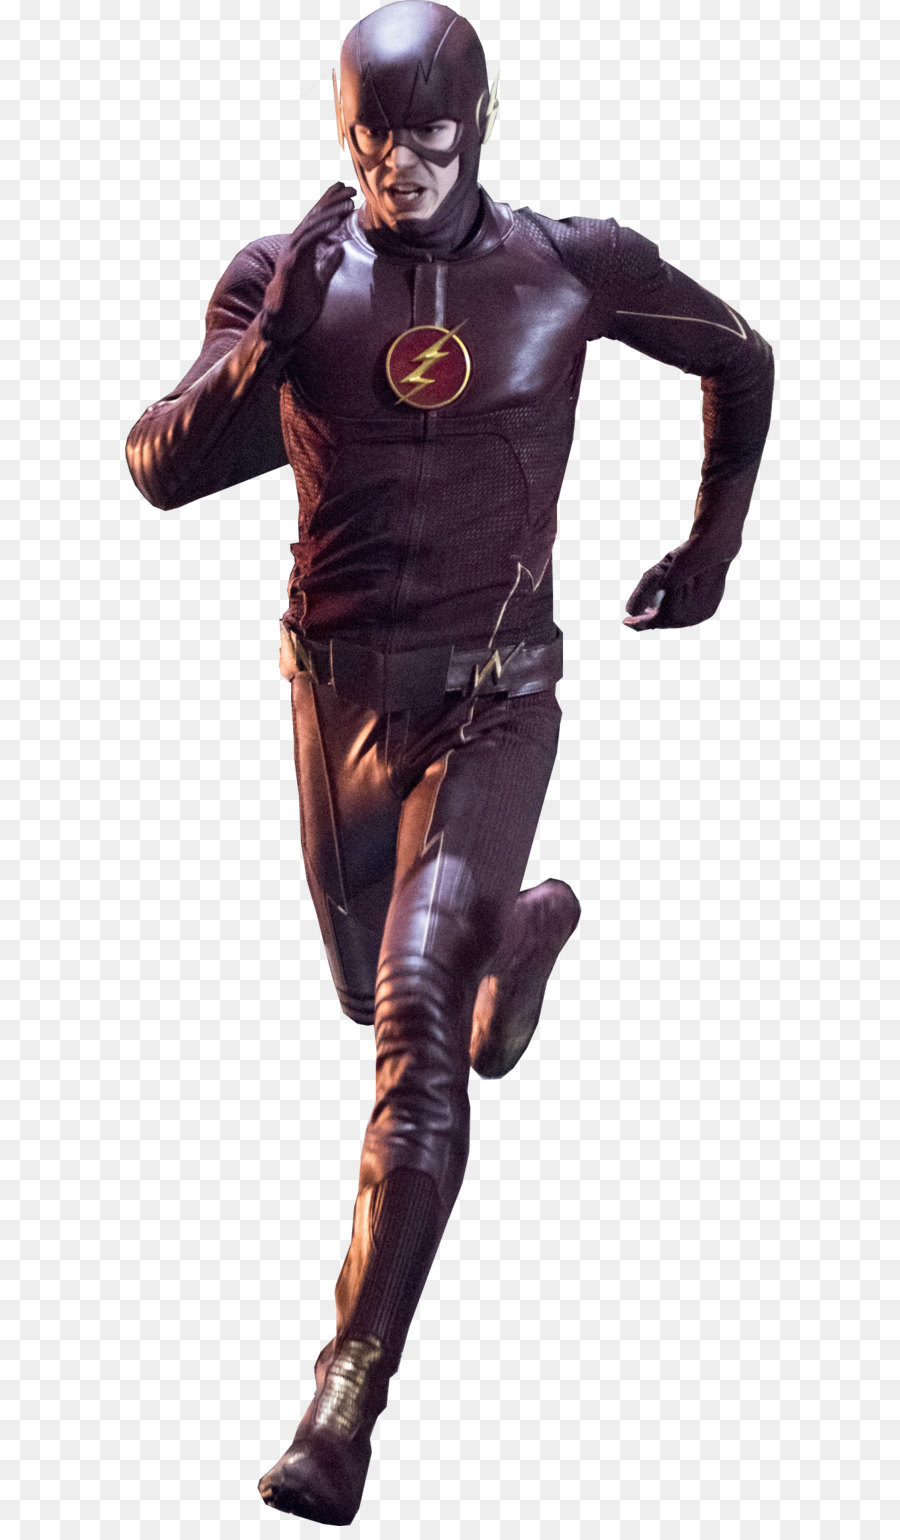 The Flash - Flash Free Download Png png download - 990*2324 - Free Transparent  png Download.